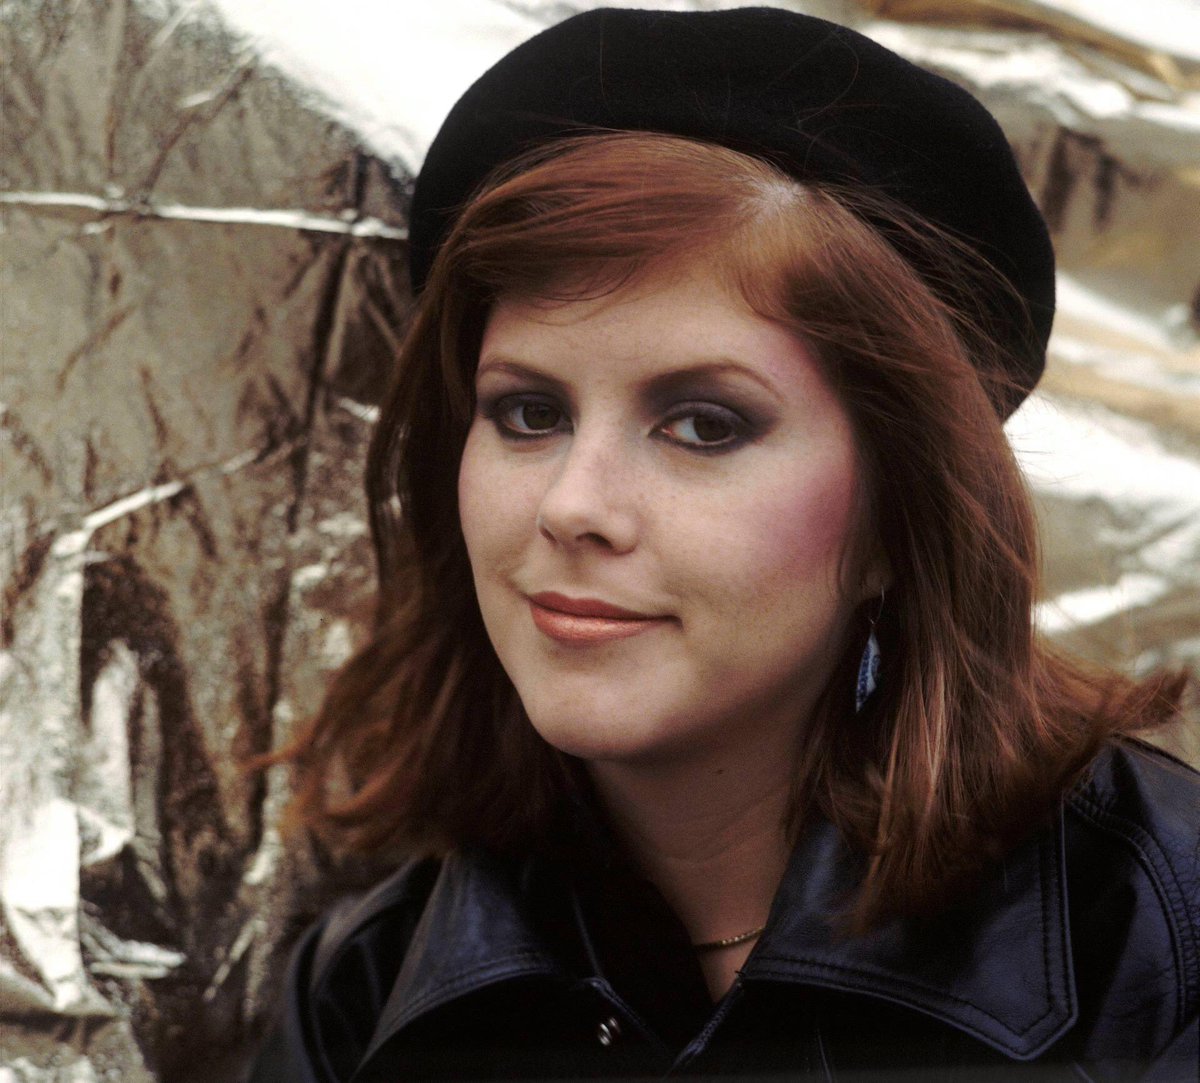 Remembering Kirsty 22 years 💔 1959 - 18 dec 2000
#kirstyMacColl @poguesofficial